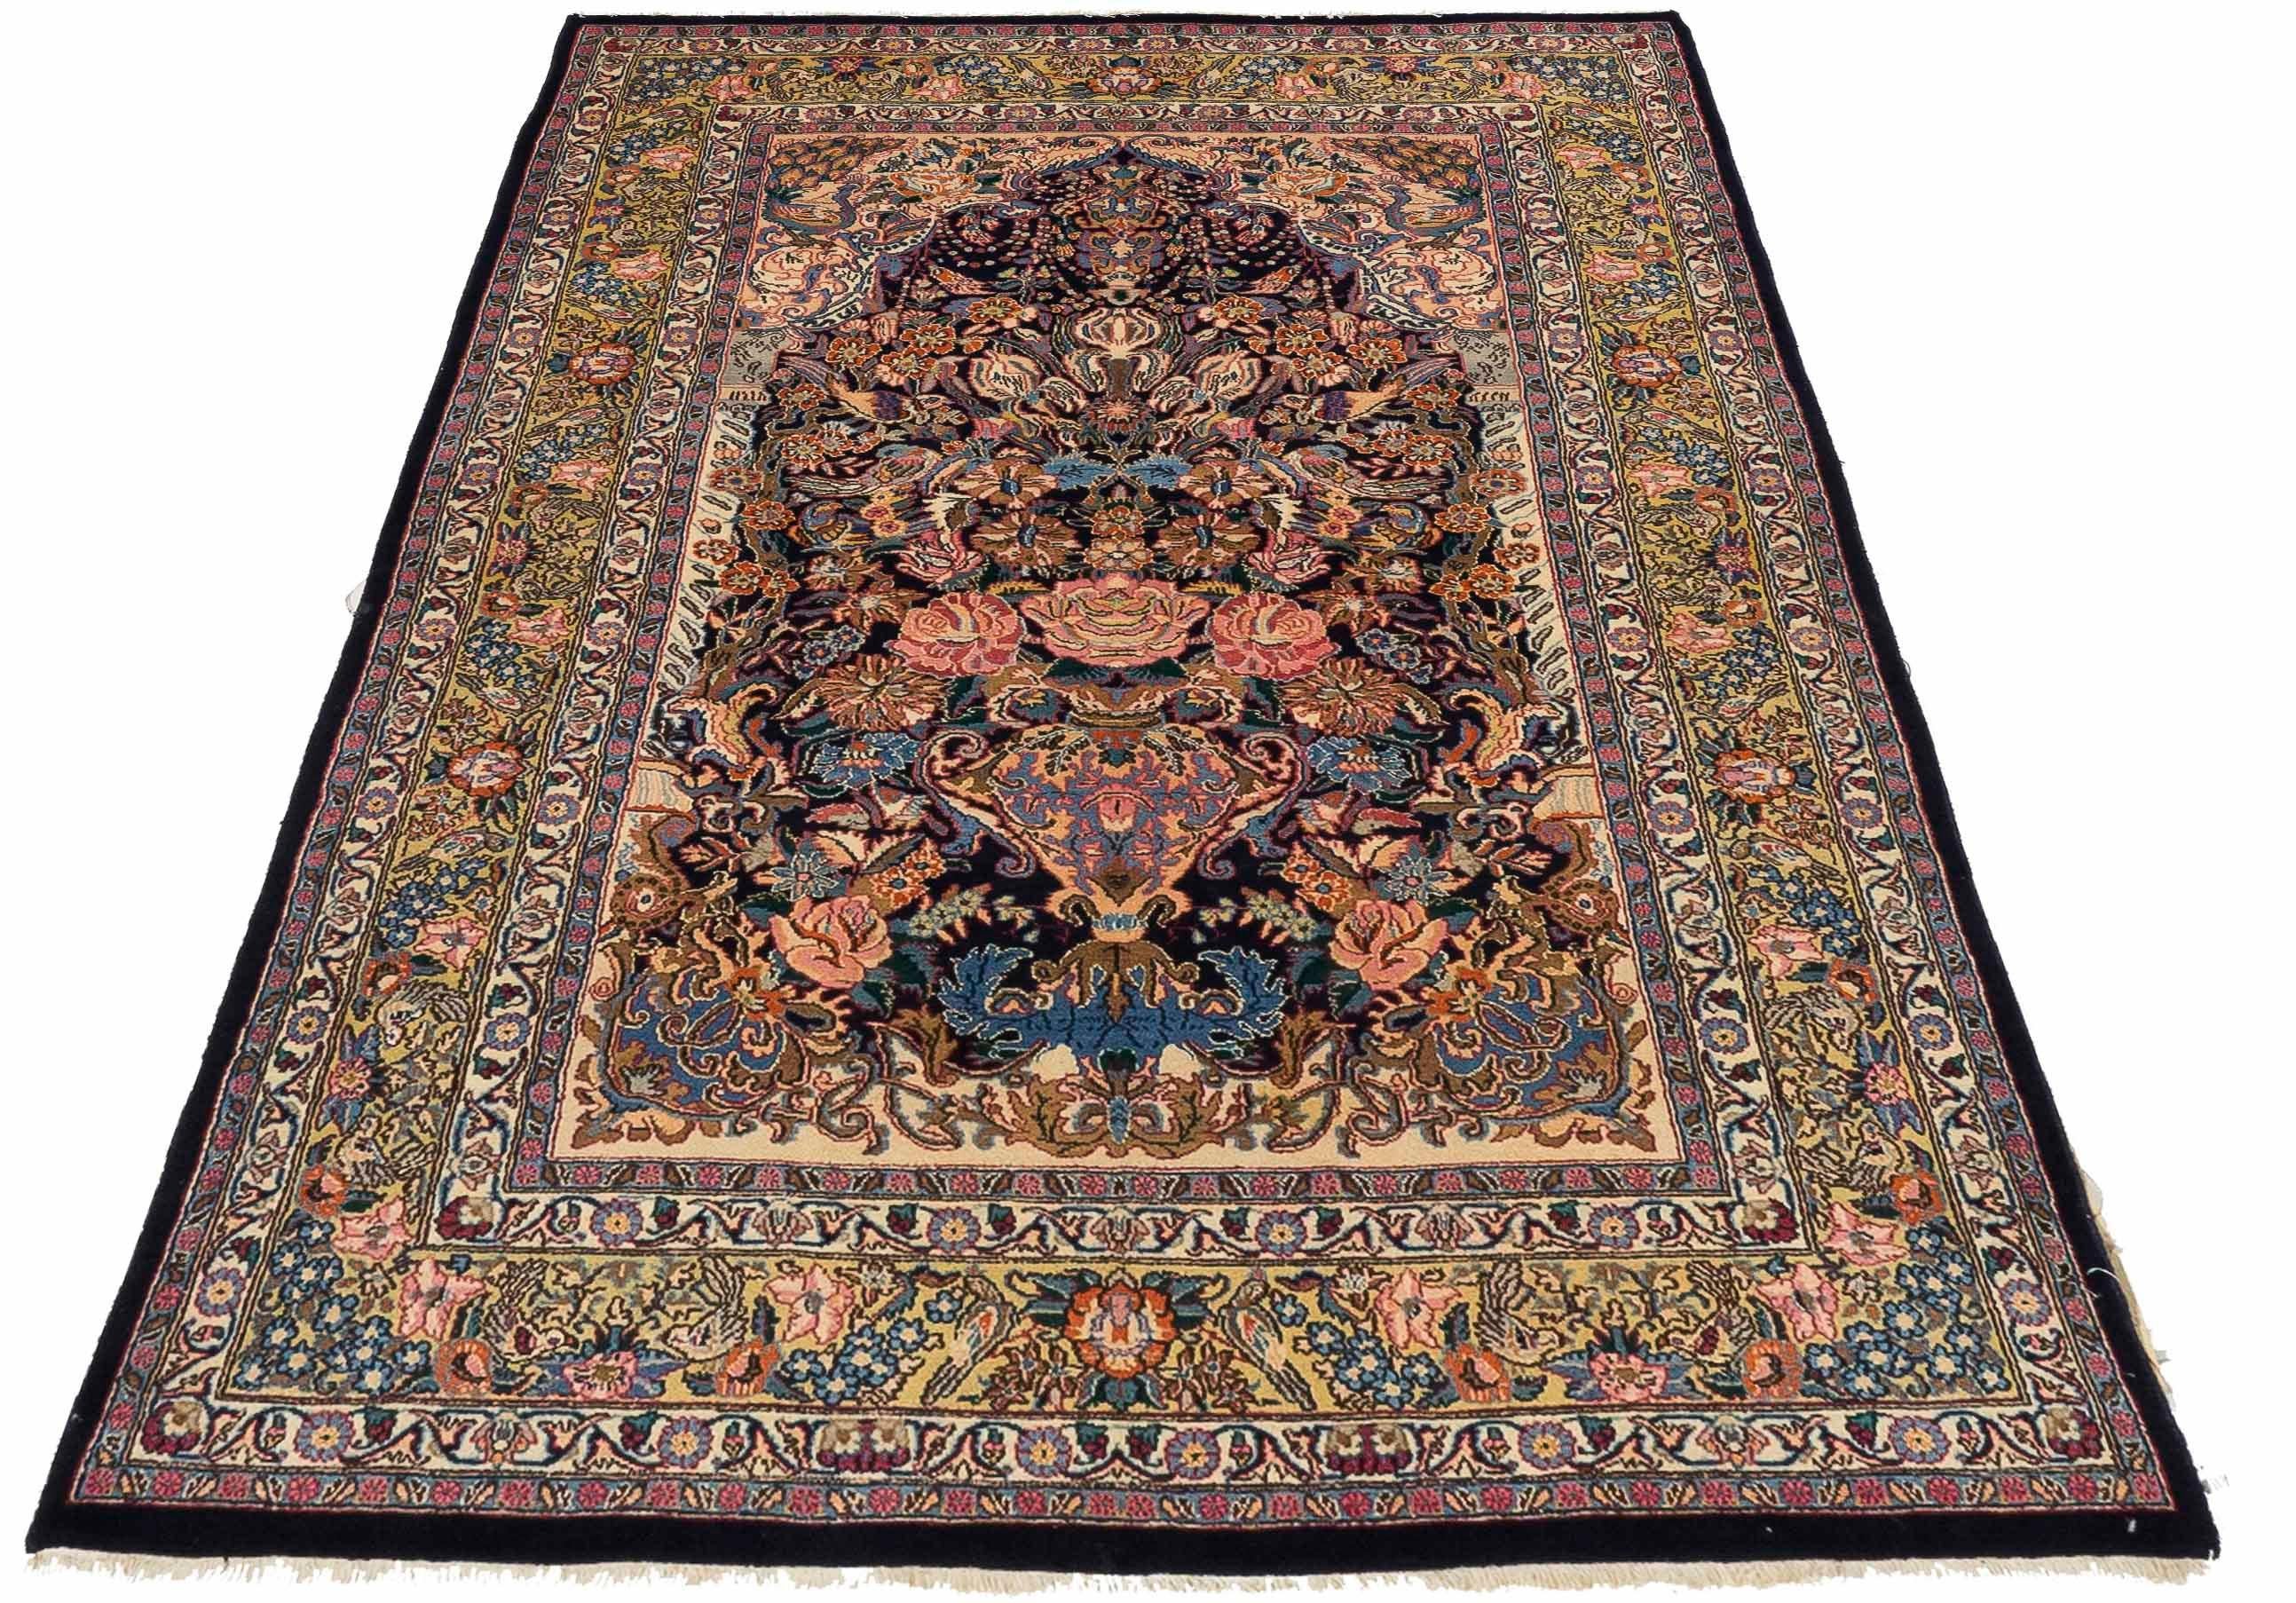 Vintage Persian area rug handwoven from the finest sheep’s wool. It’s colored with all-natural vegetable dyes that are safe for humans and pets. It’s a traditional Mashad design handwoven by expert artisans. It’s a lovely area rug that can be